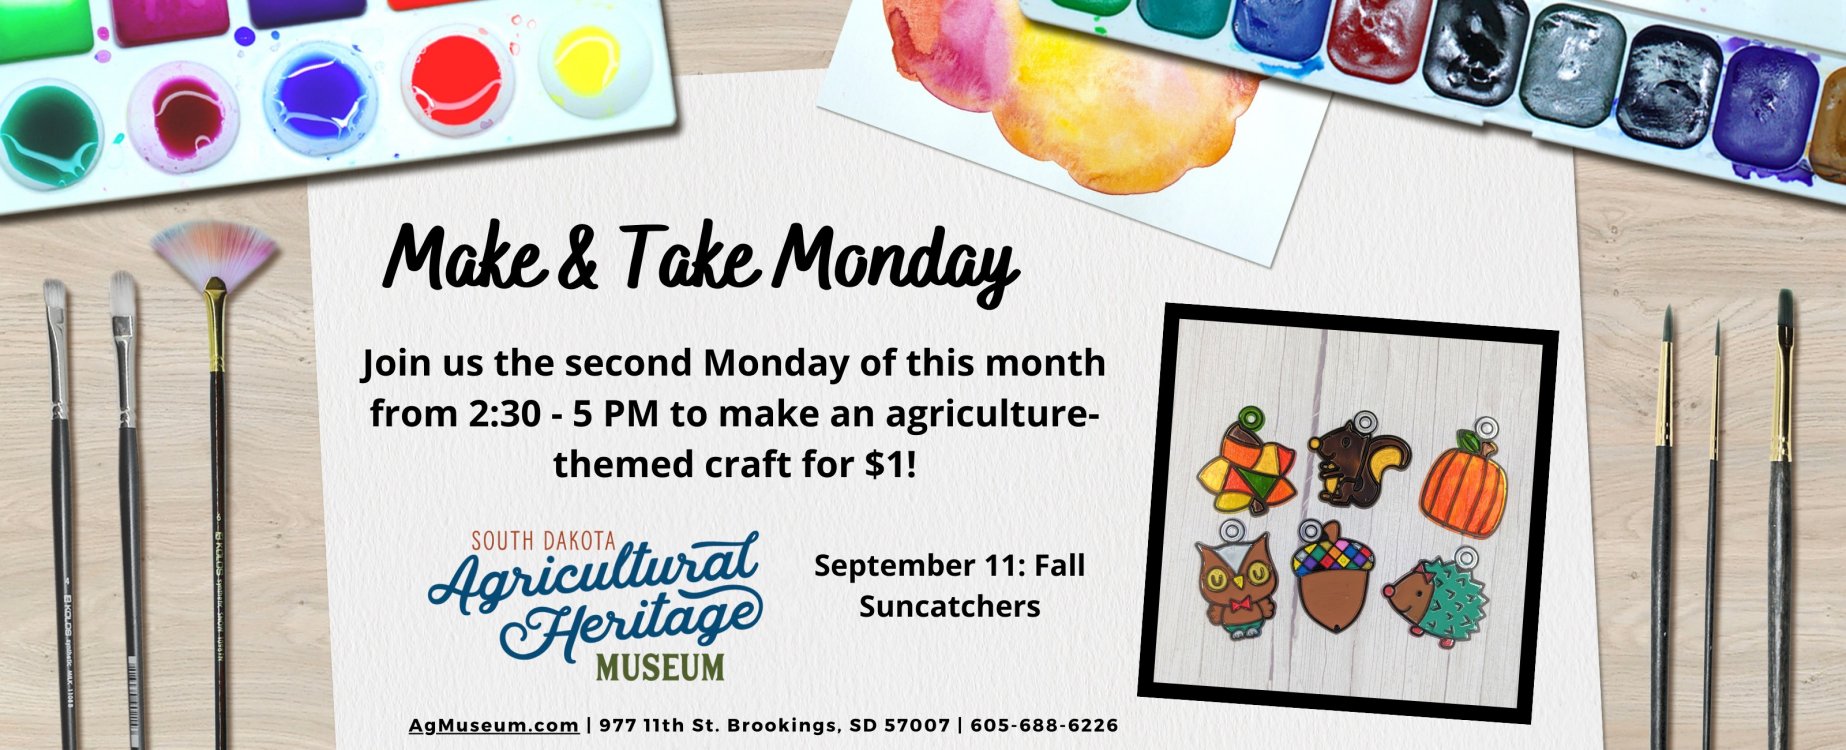 September 11 Make and Take Monday Craft: Fall Suncatchers.  Join us on the 2nd Monday of each month from 2:30 to 5 p.m. to make an agriculture-themed craft for $1!